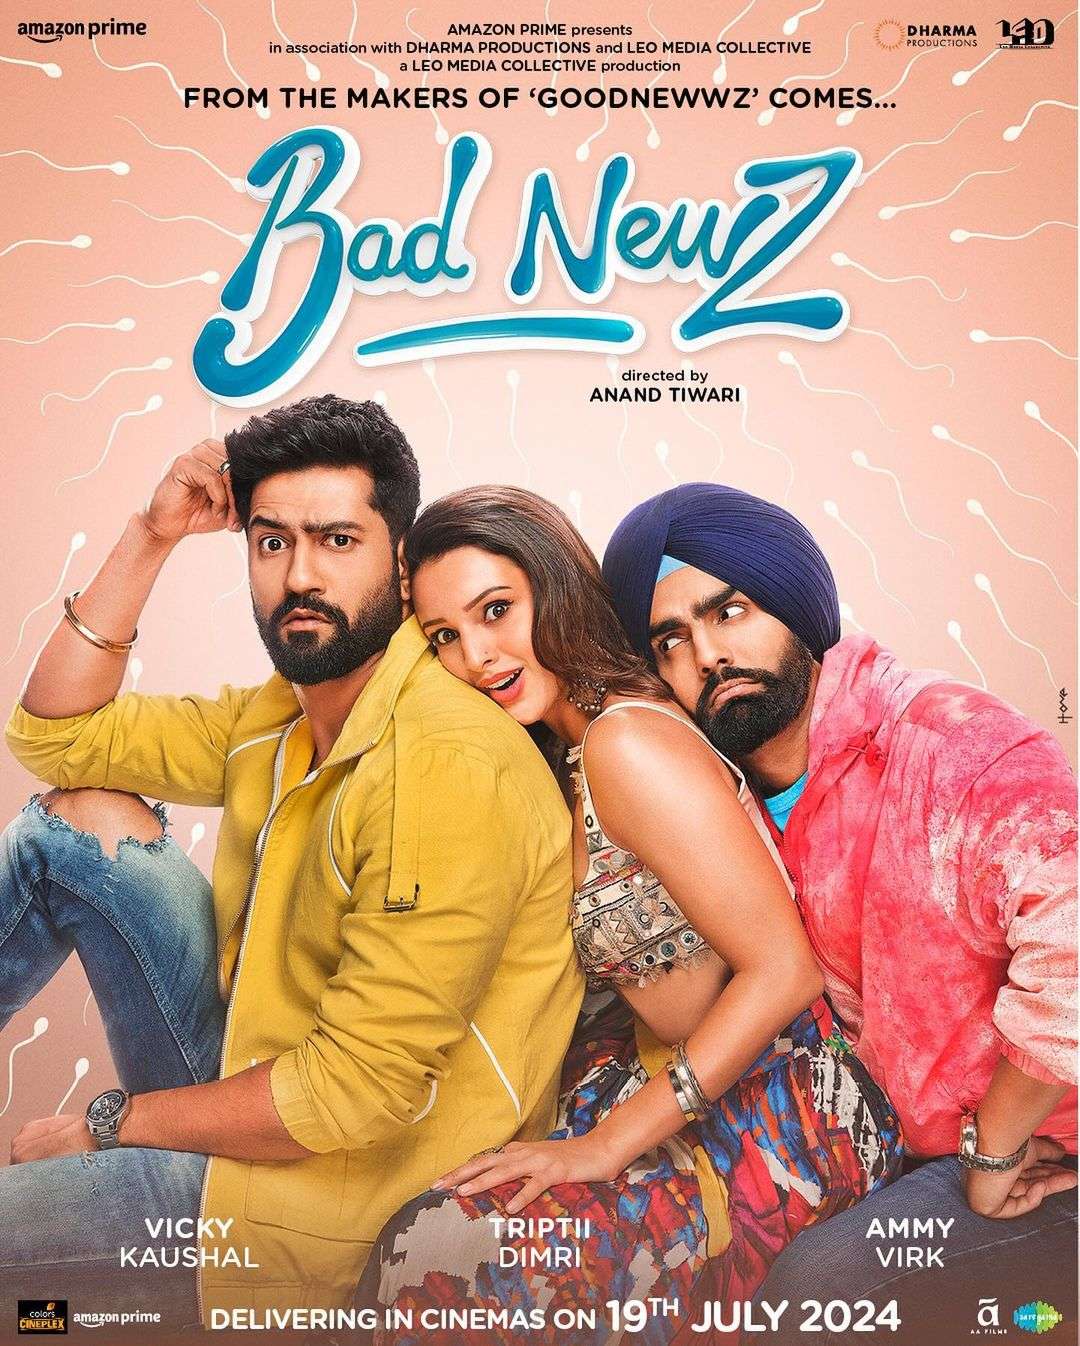 Tripti dimri vicky kaushal movie bad newz release date first poster revealed